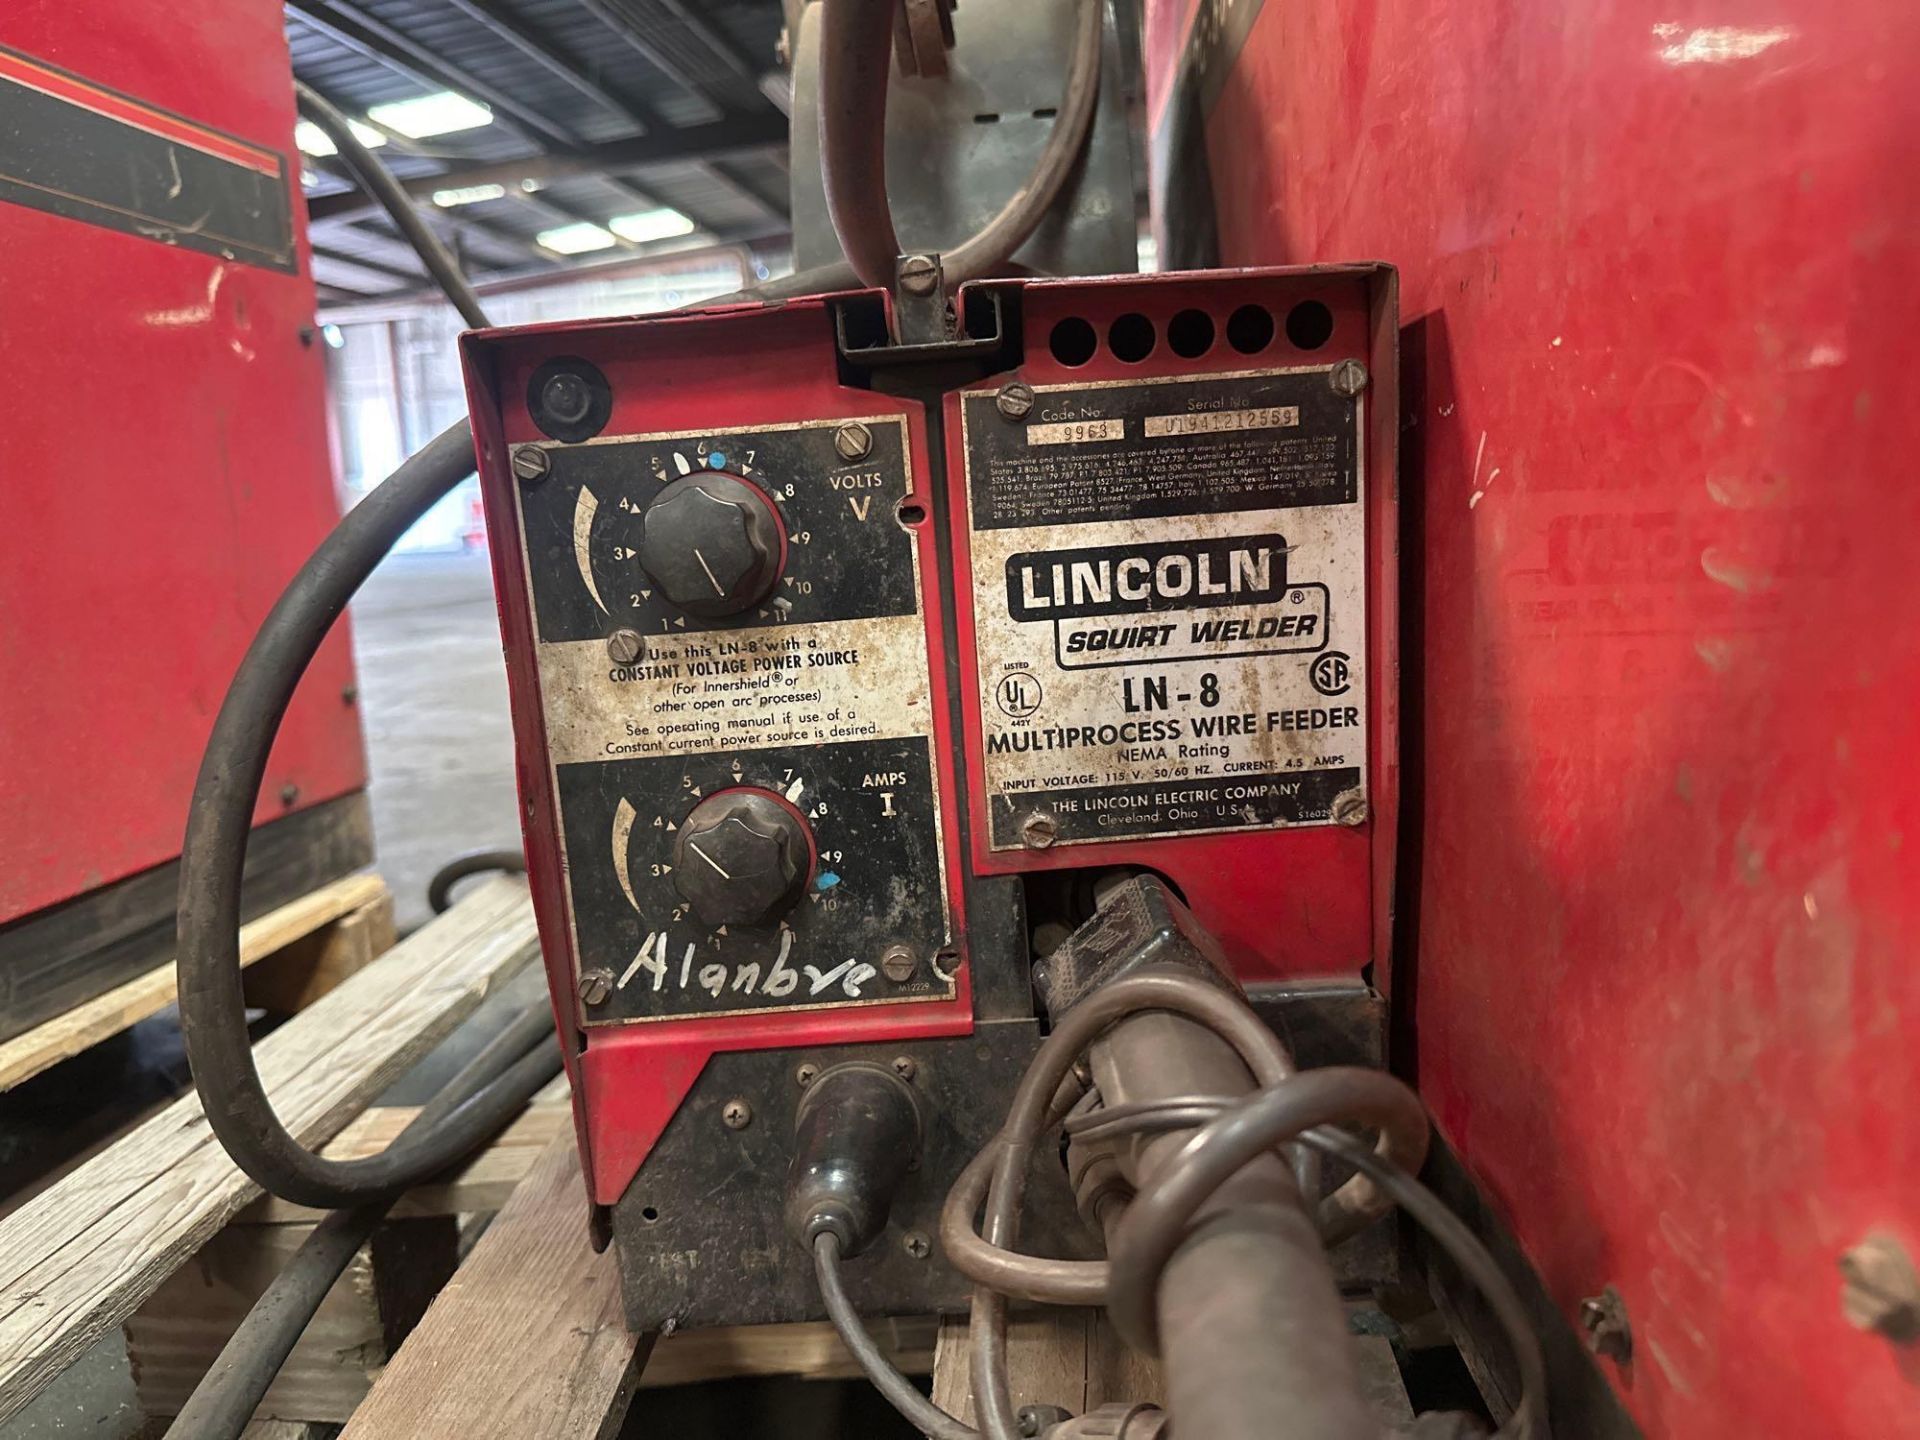 Lincoln Electric DC-600Welder, s/n U 1020461387 w/ Lincoln Squirt Welder LN-8Wire Feeder - Image 3 of 10